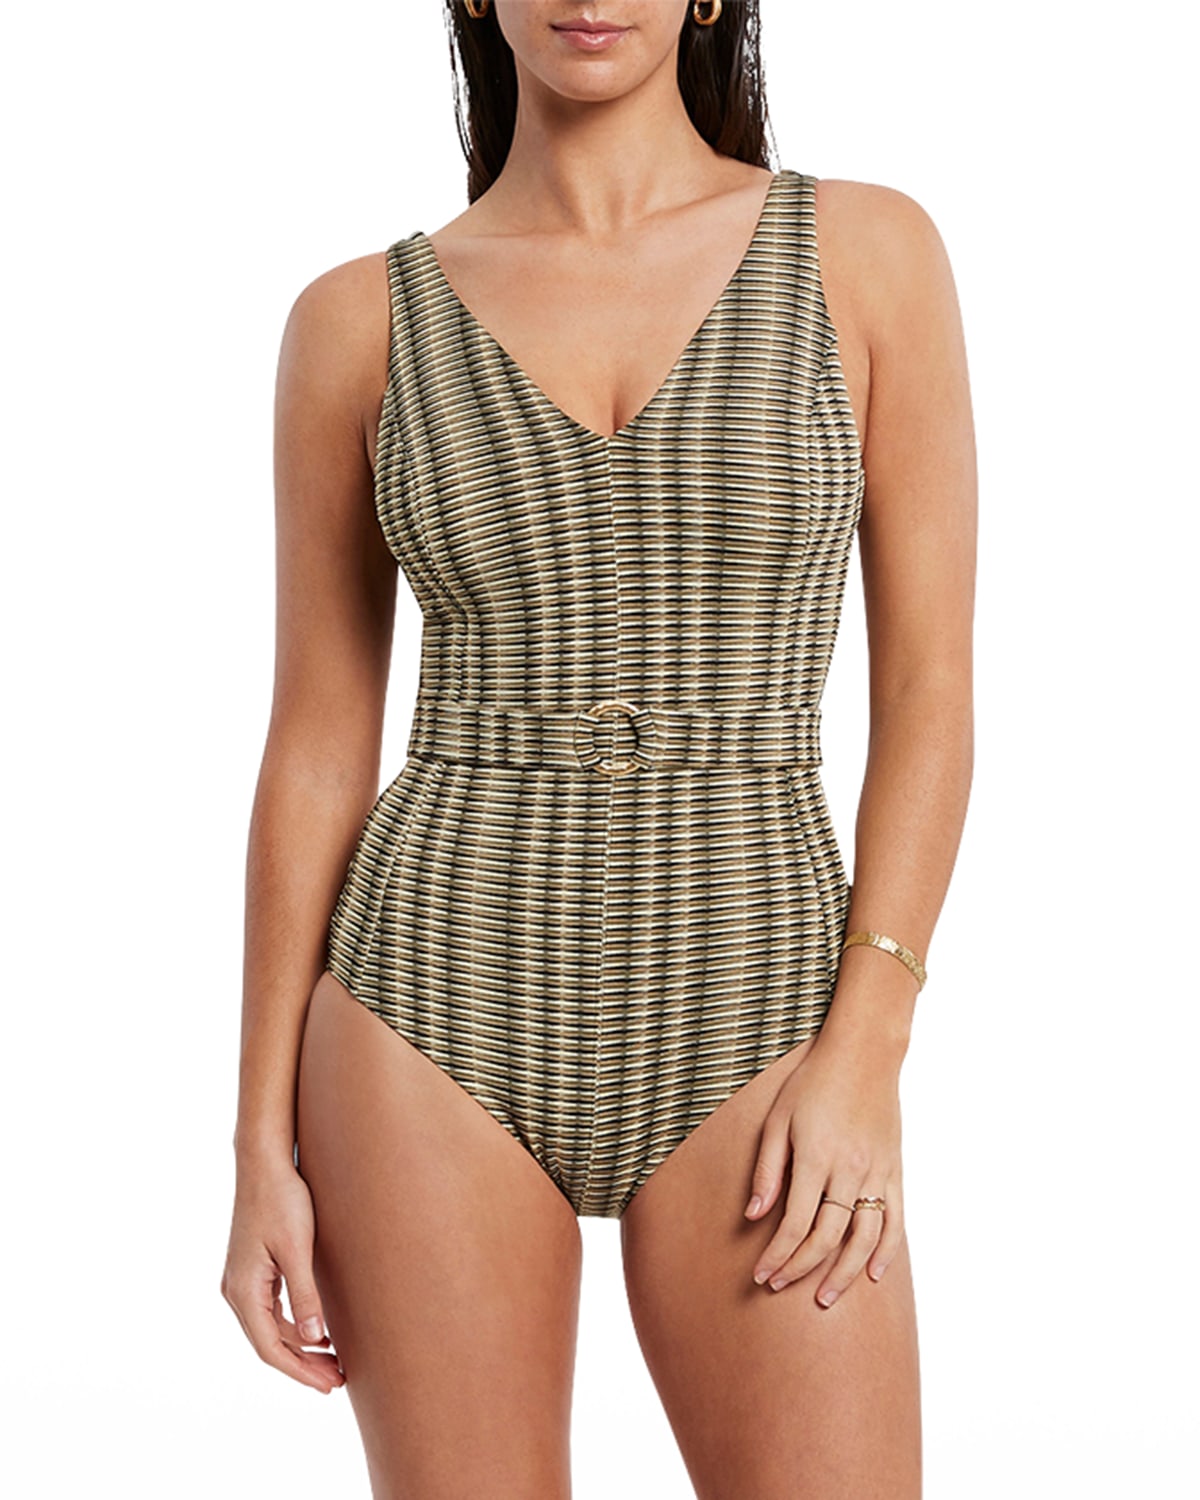 JETS Australia Ravello Belted One-Piece Swimsuit (D-DD Cup)